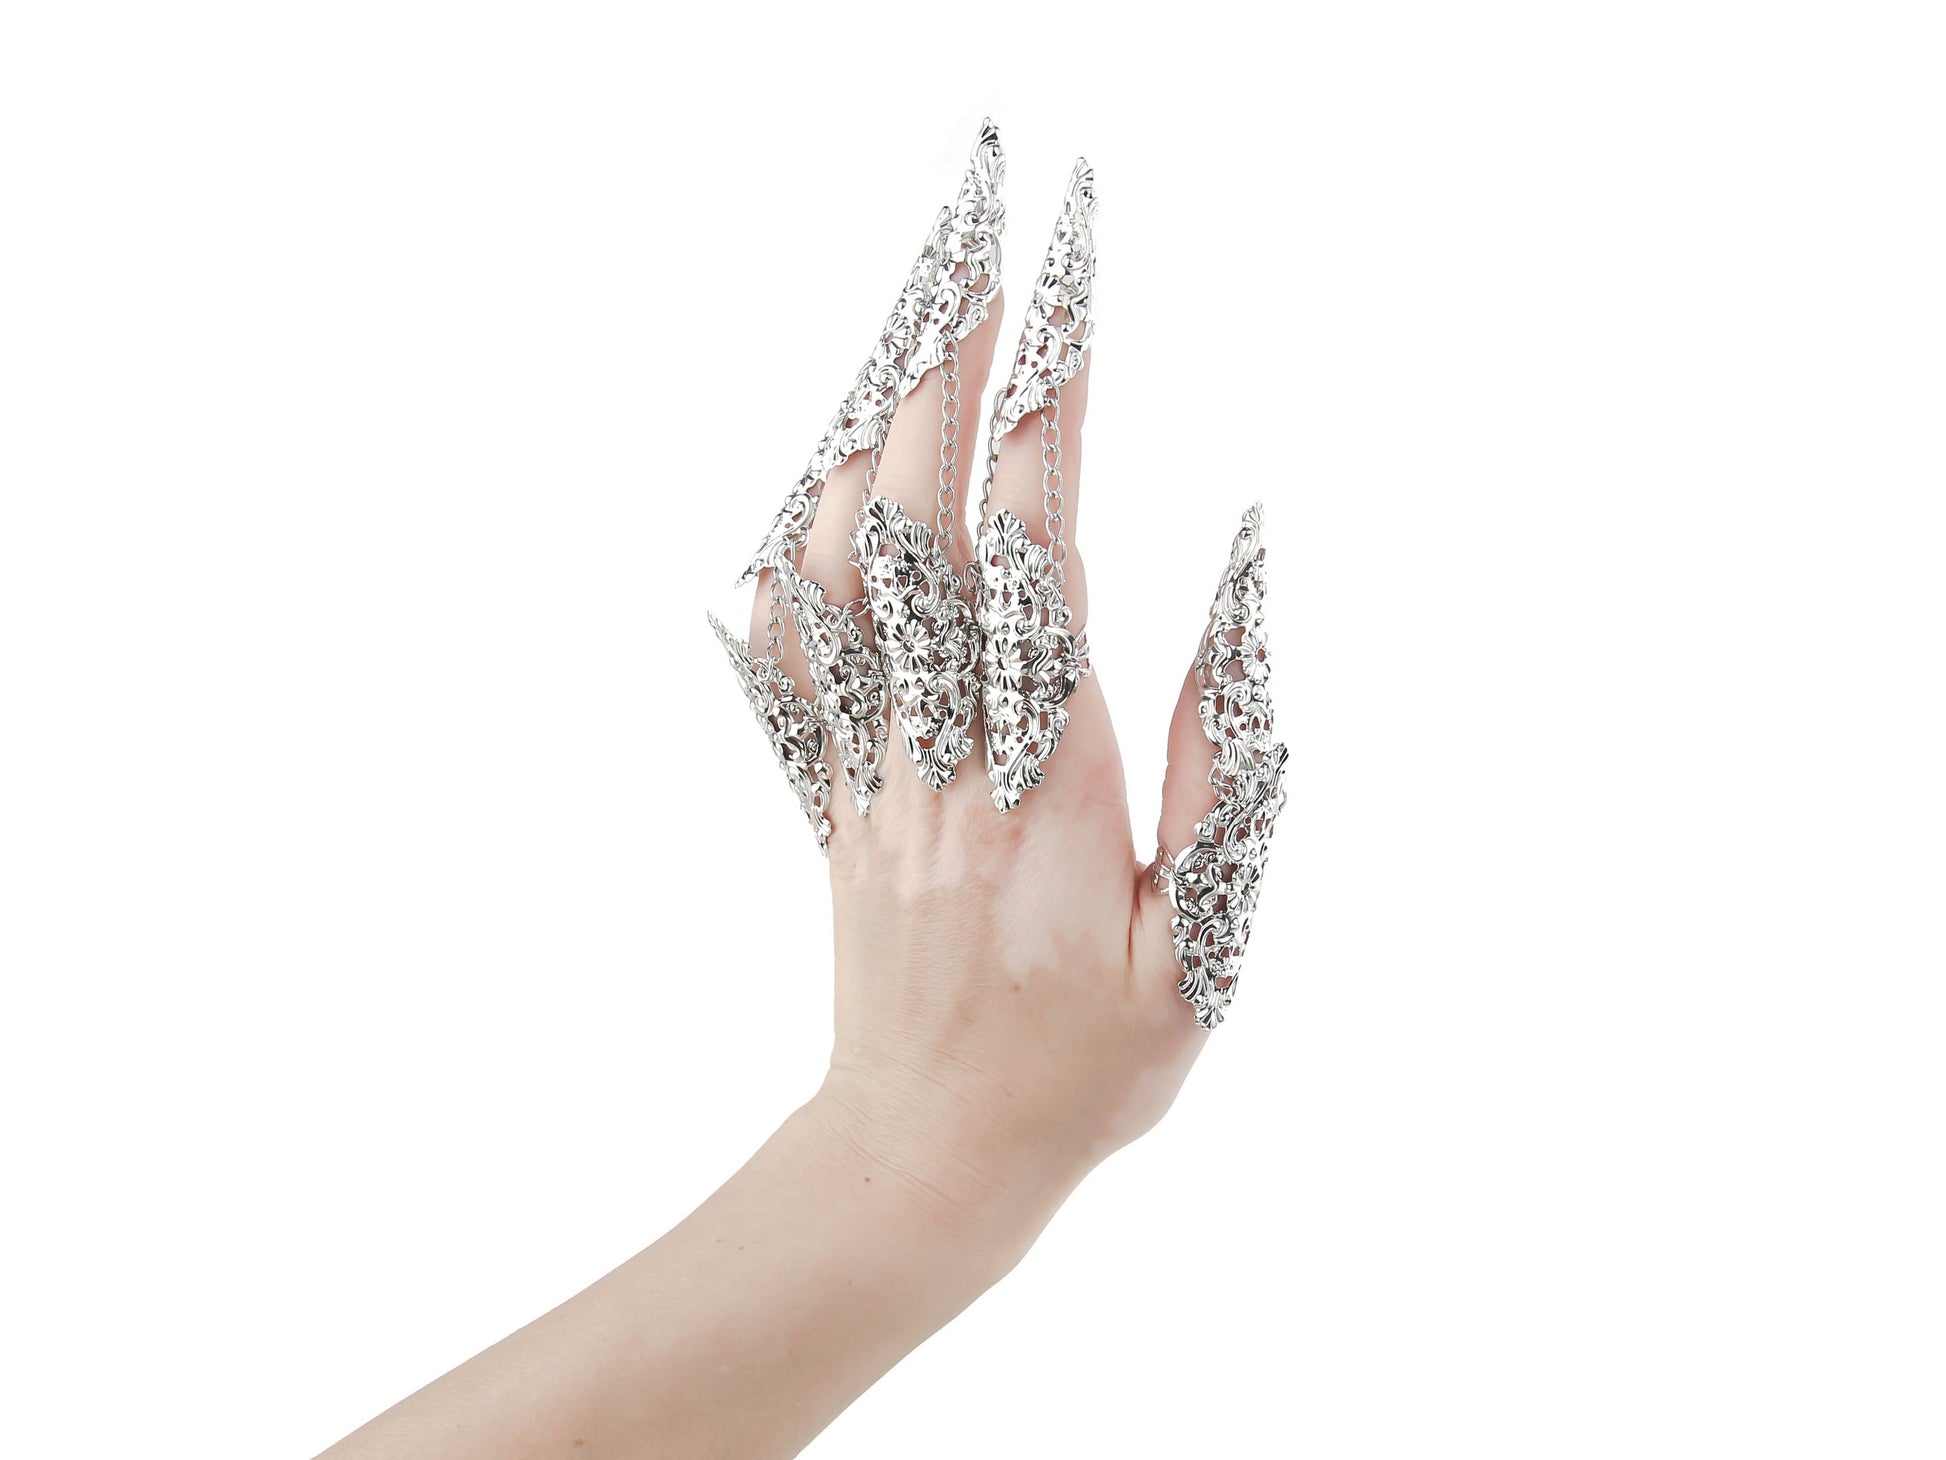 A full hand adorned with Myril Jewels' ornate rings, each finger capped with an elegant nail claw. These pieces capture the essence of dark-avantgarde style, ideal for a neo-gothic look or adding a dramatic touch to witchcore and whimsigoth outfits, perfect for festivals or as a unique goth girlfriend gift.